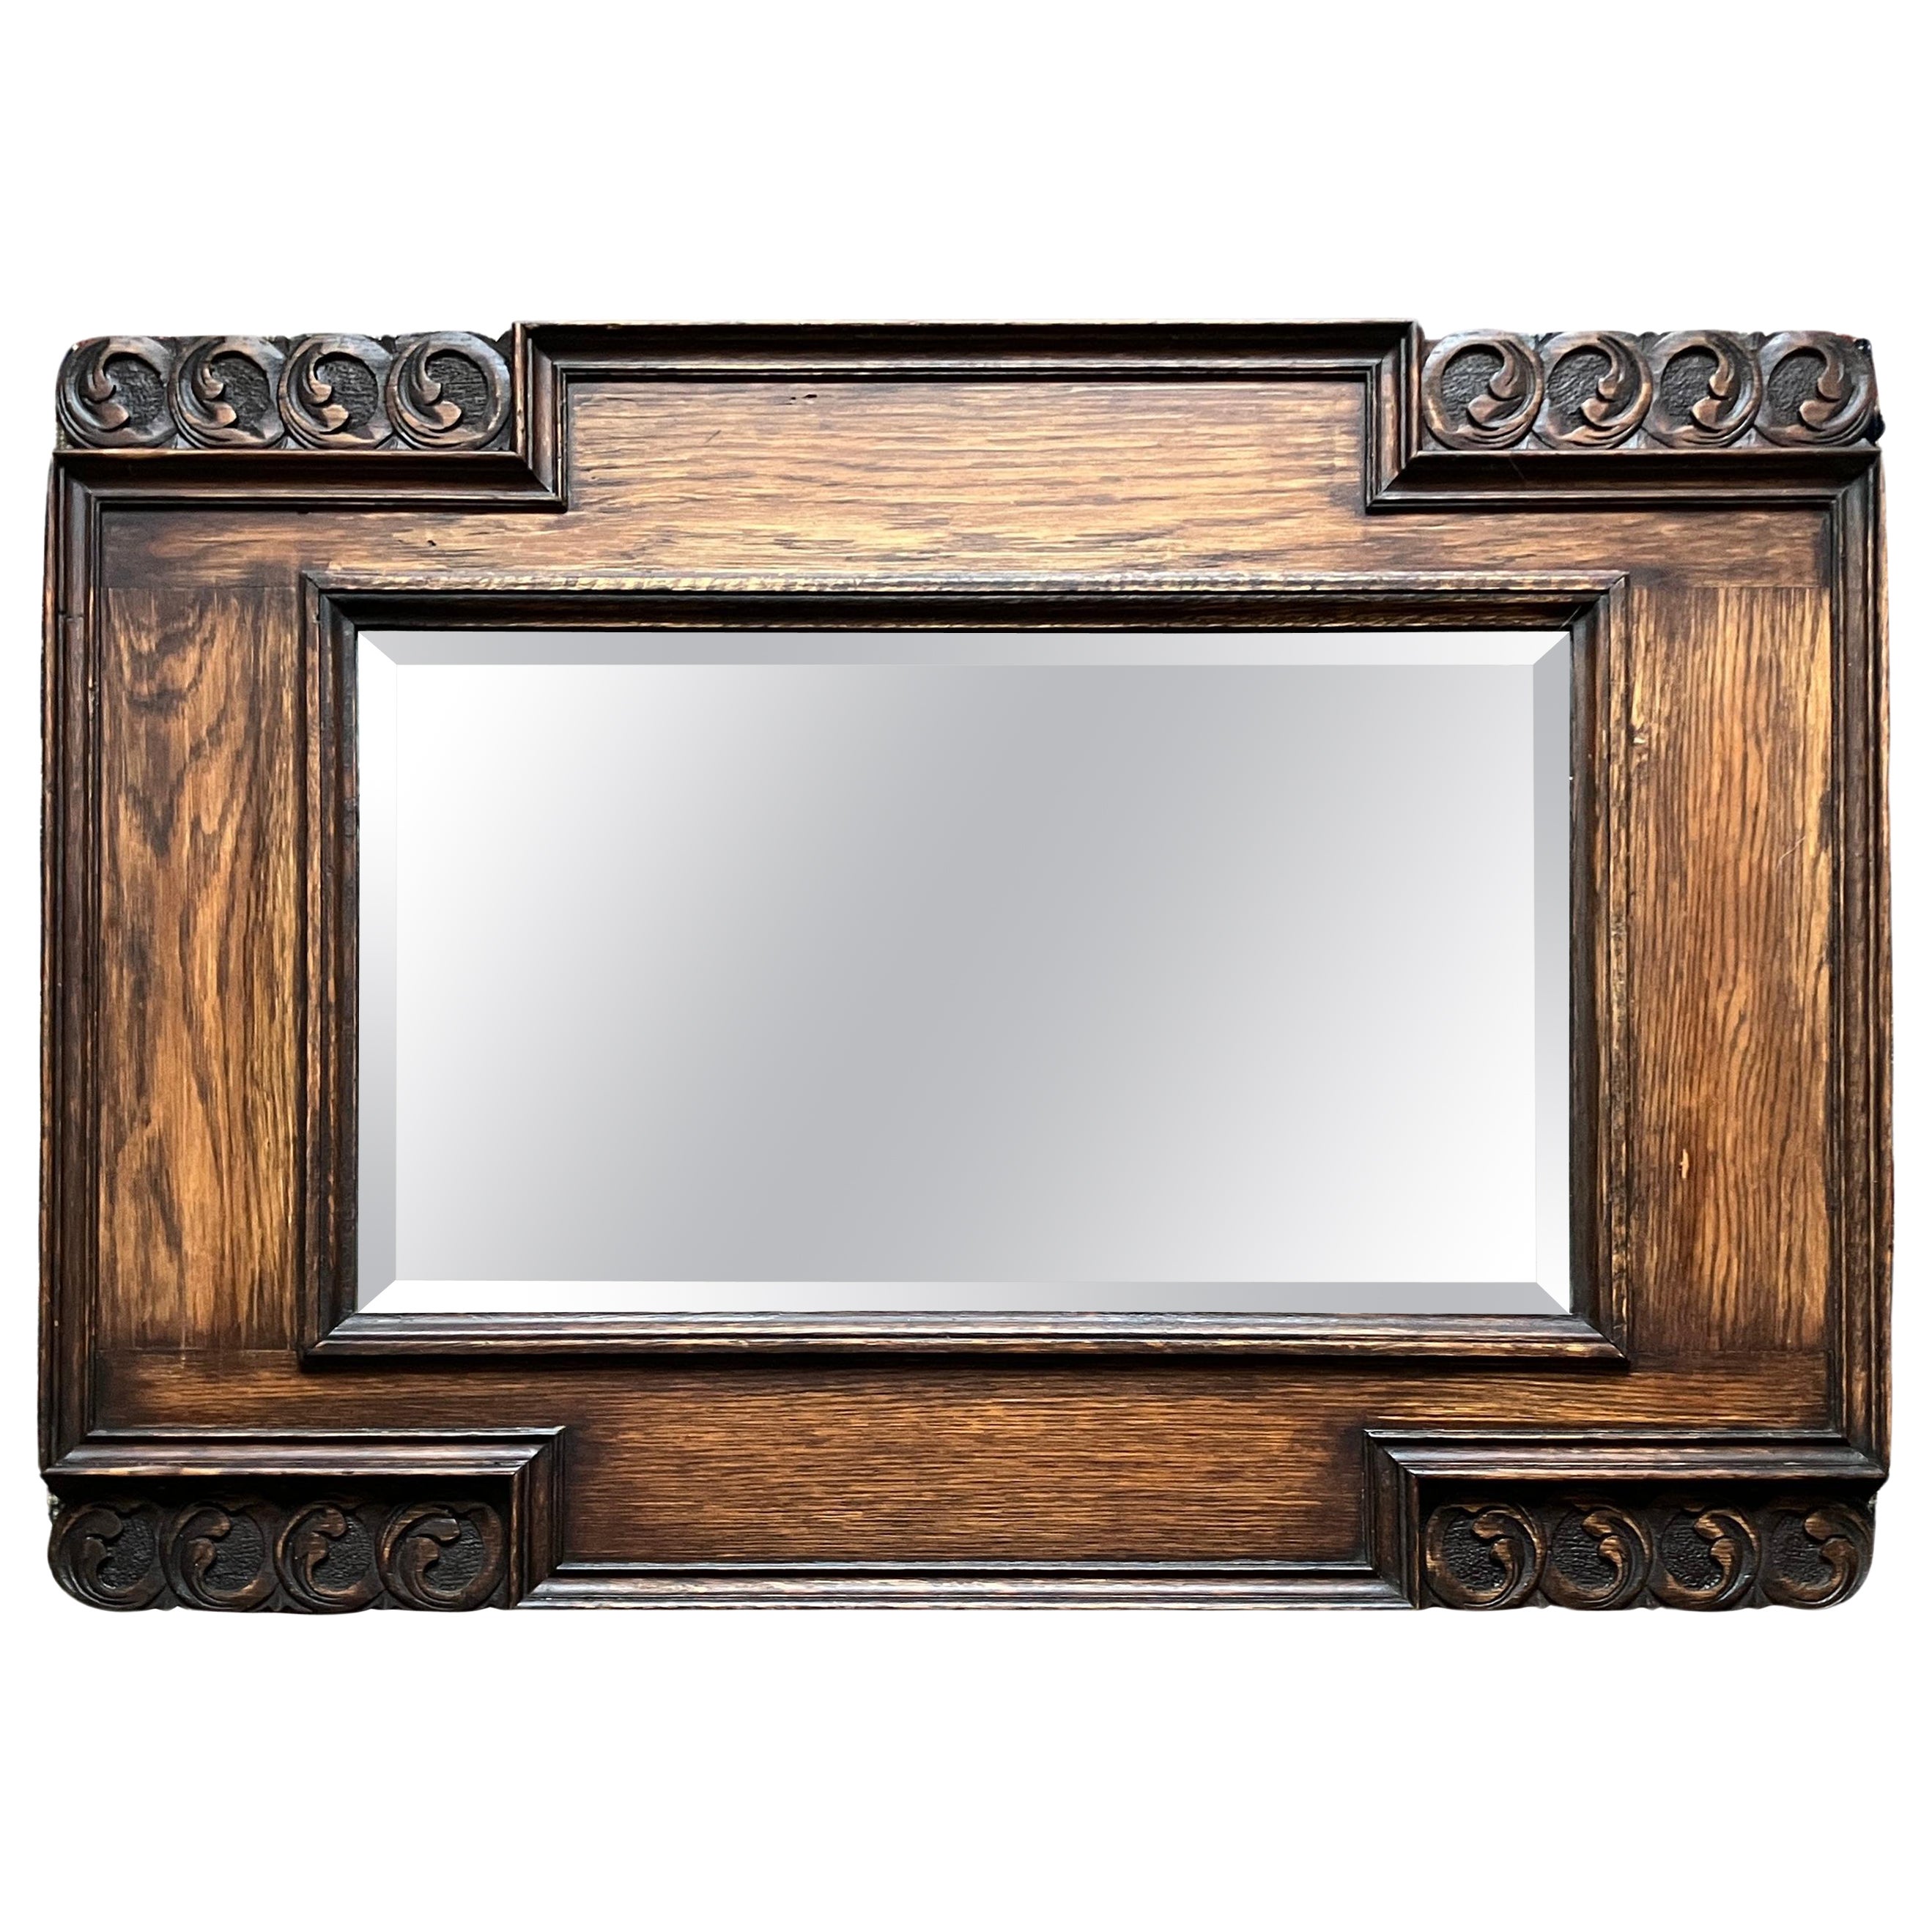 Large Decorative English Oak Framed Art & Crafts Mantel Mirror Late 19th Century For Sale